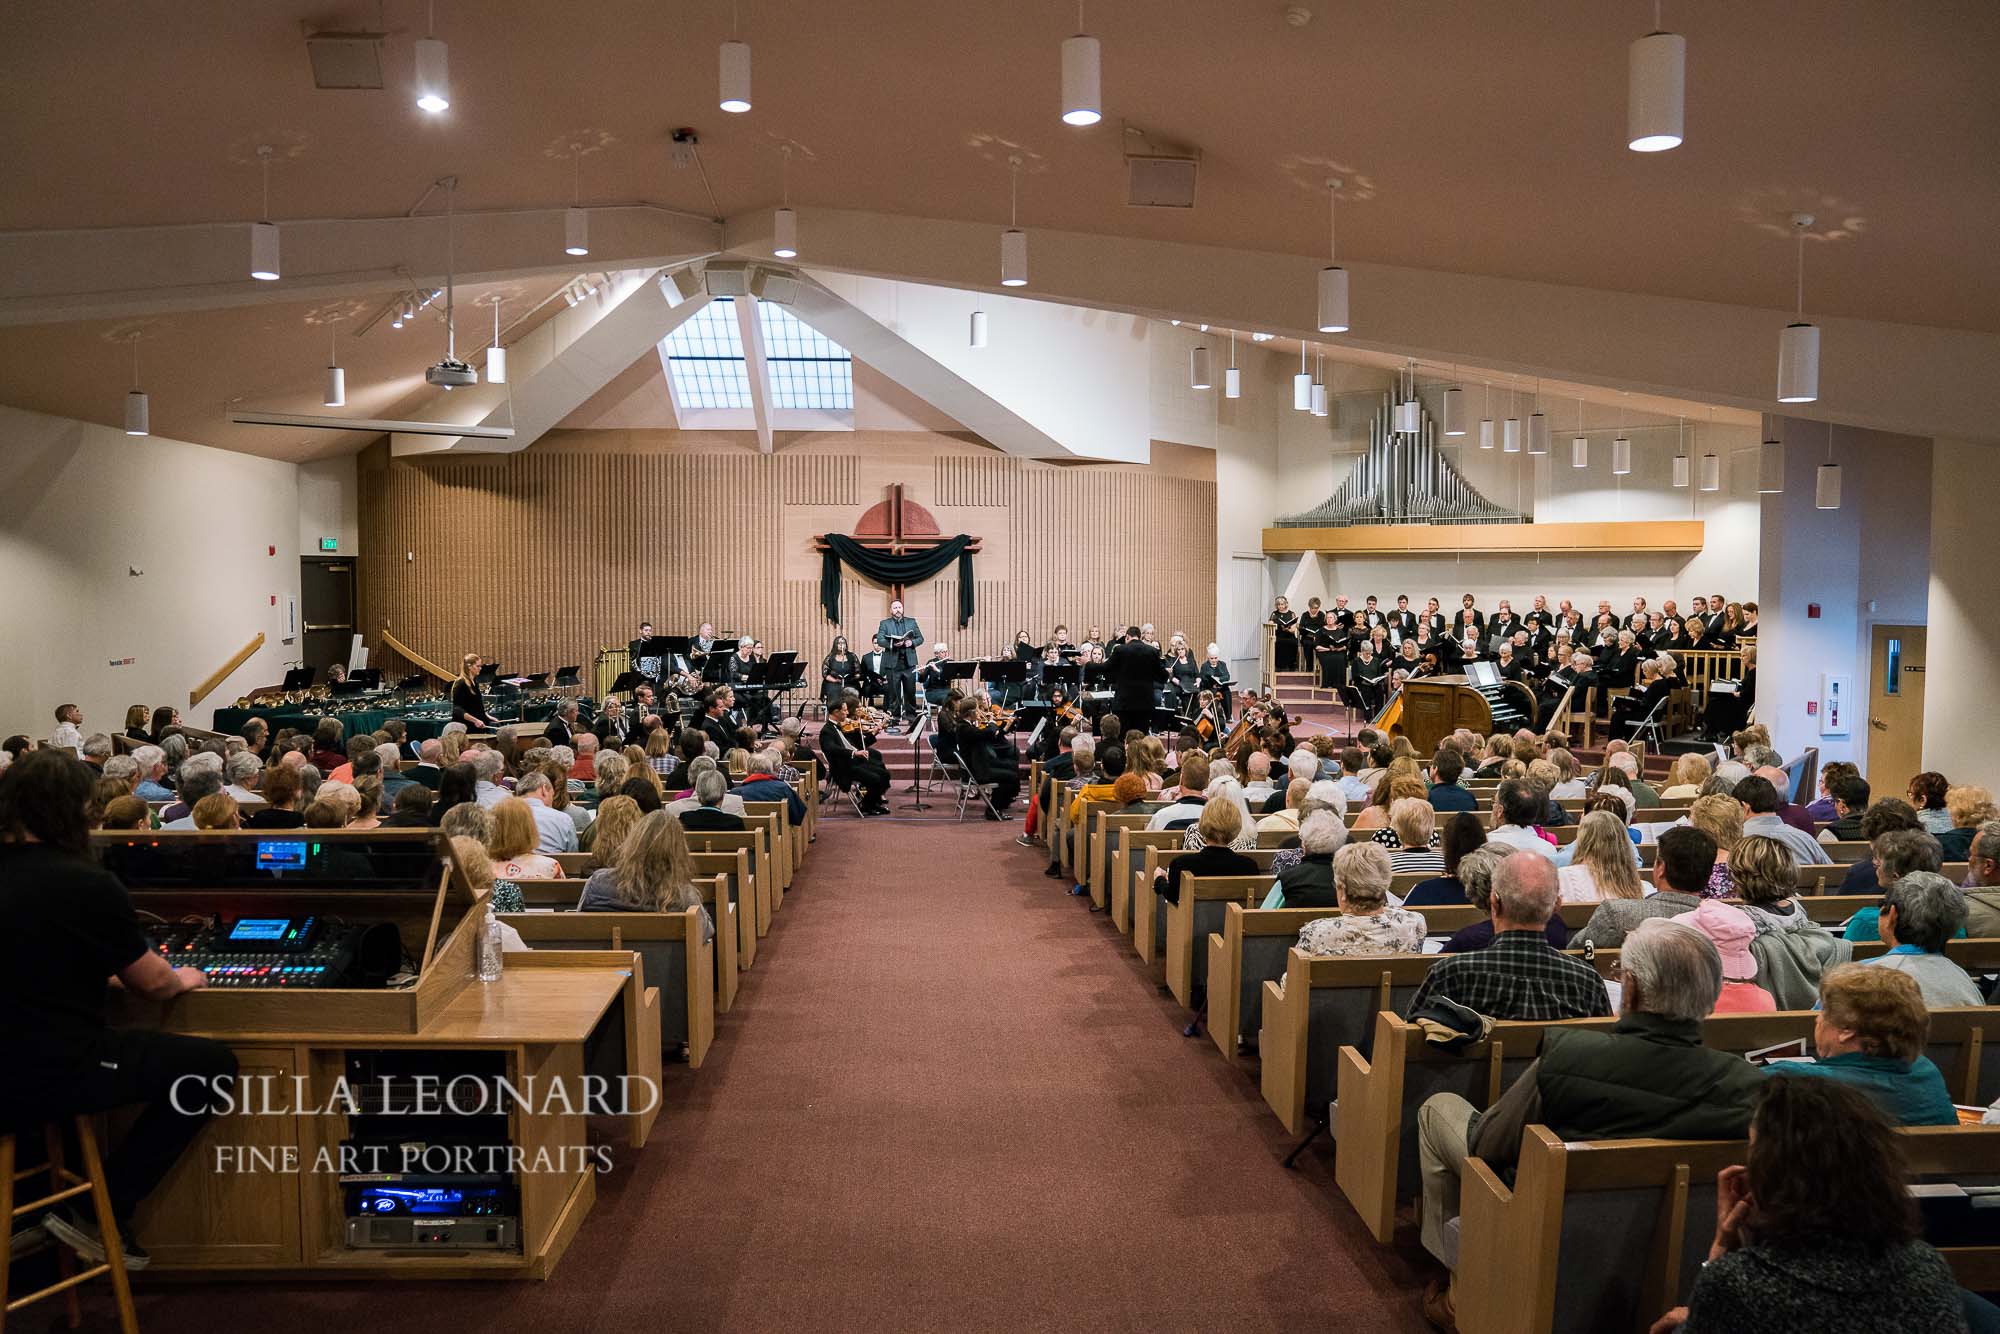 Grand junction photographer shows images of Good Friday concert (1)